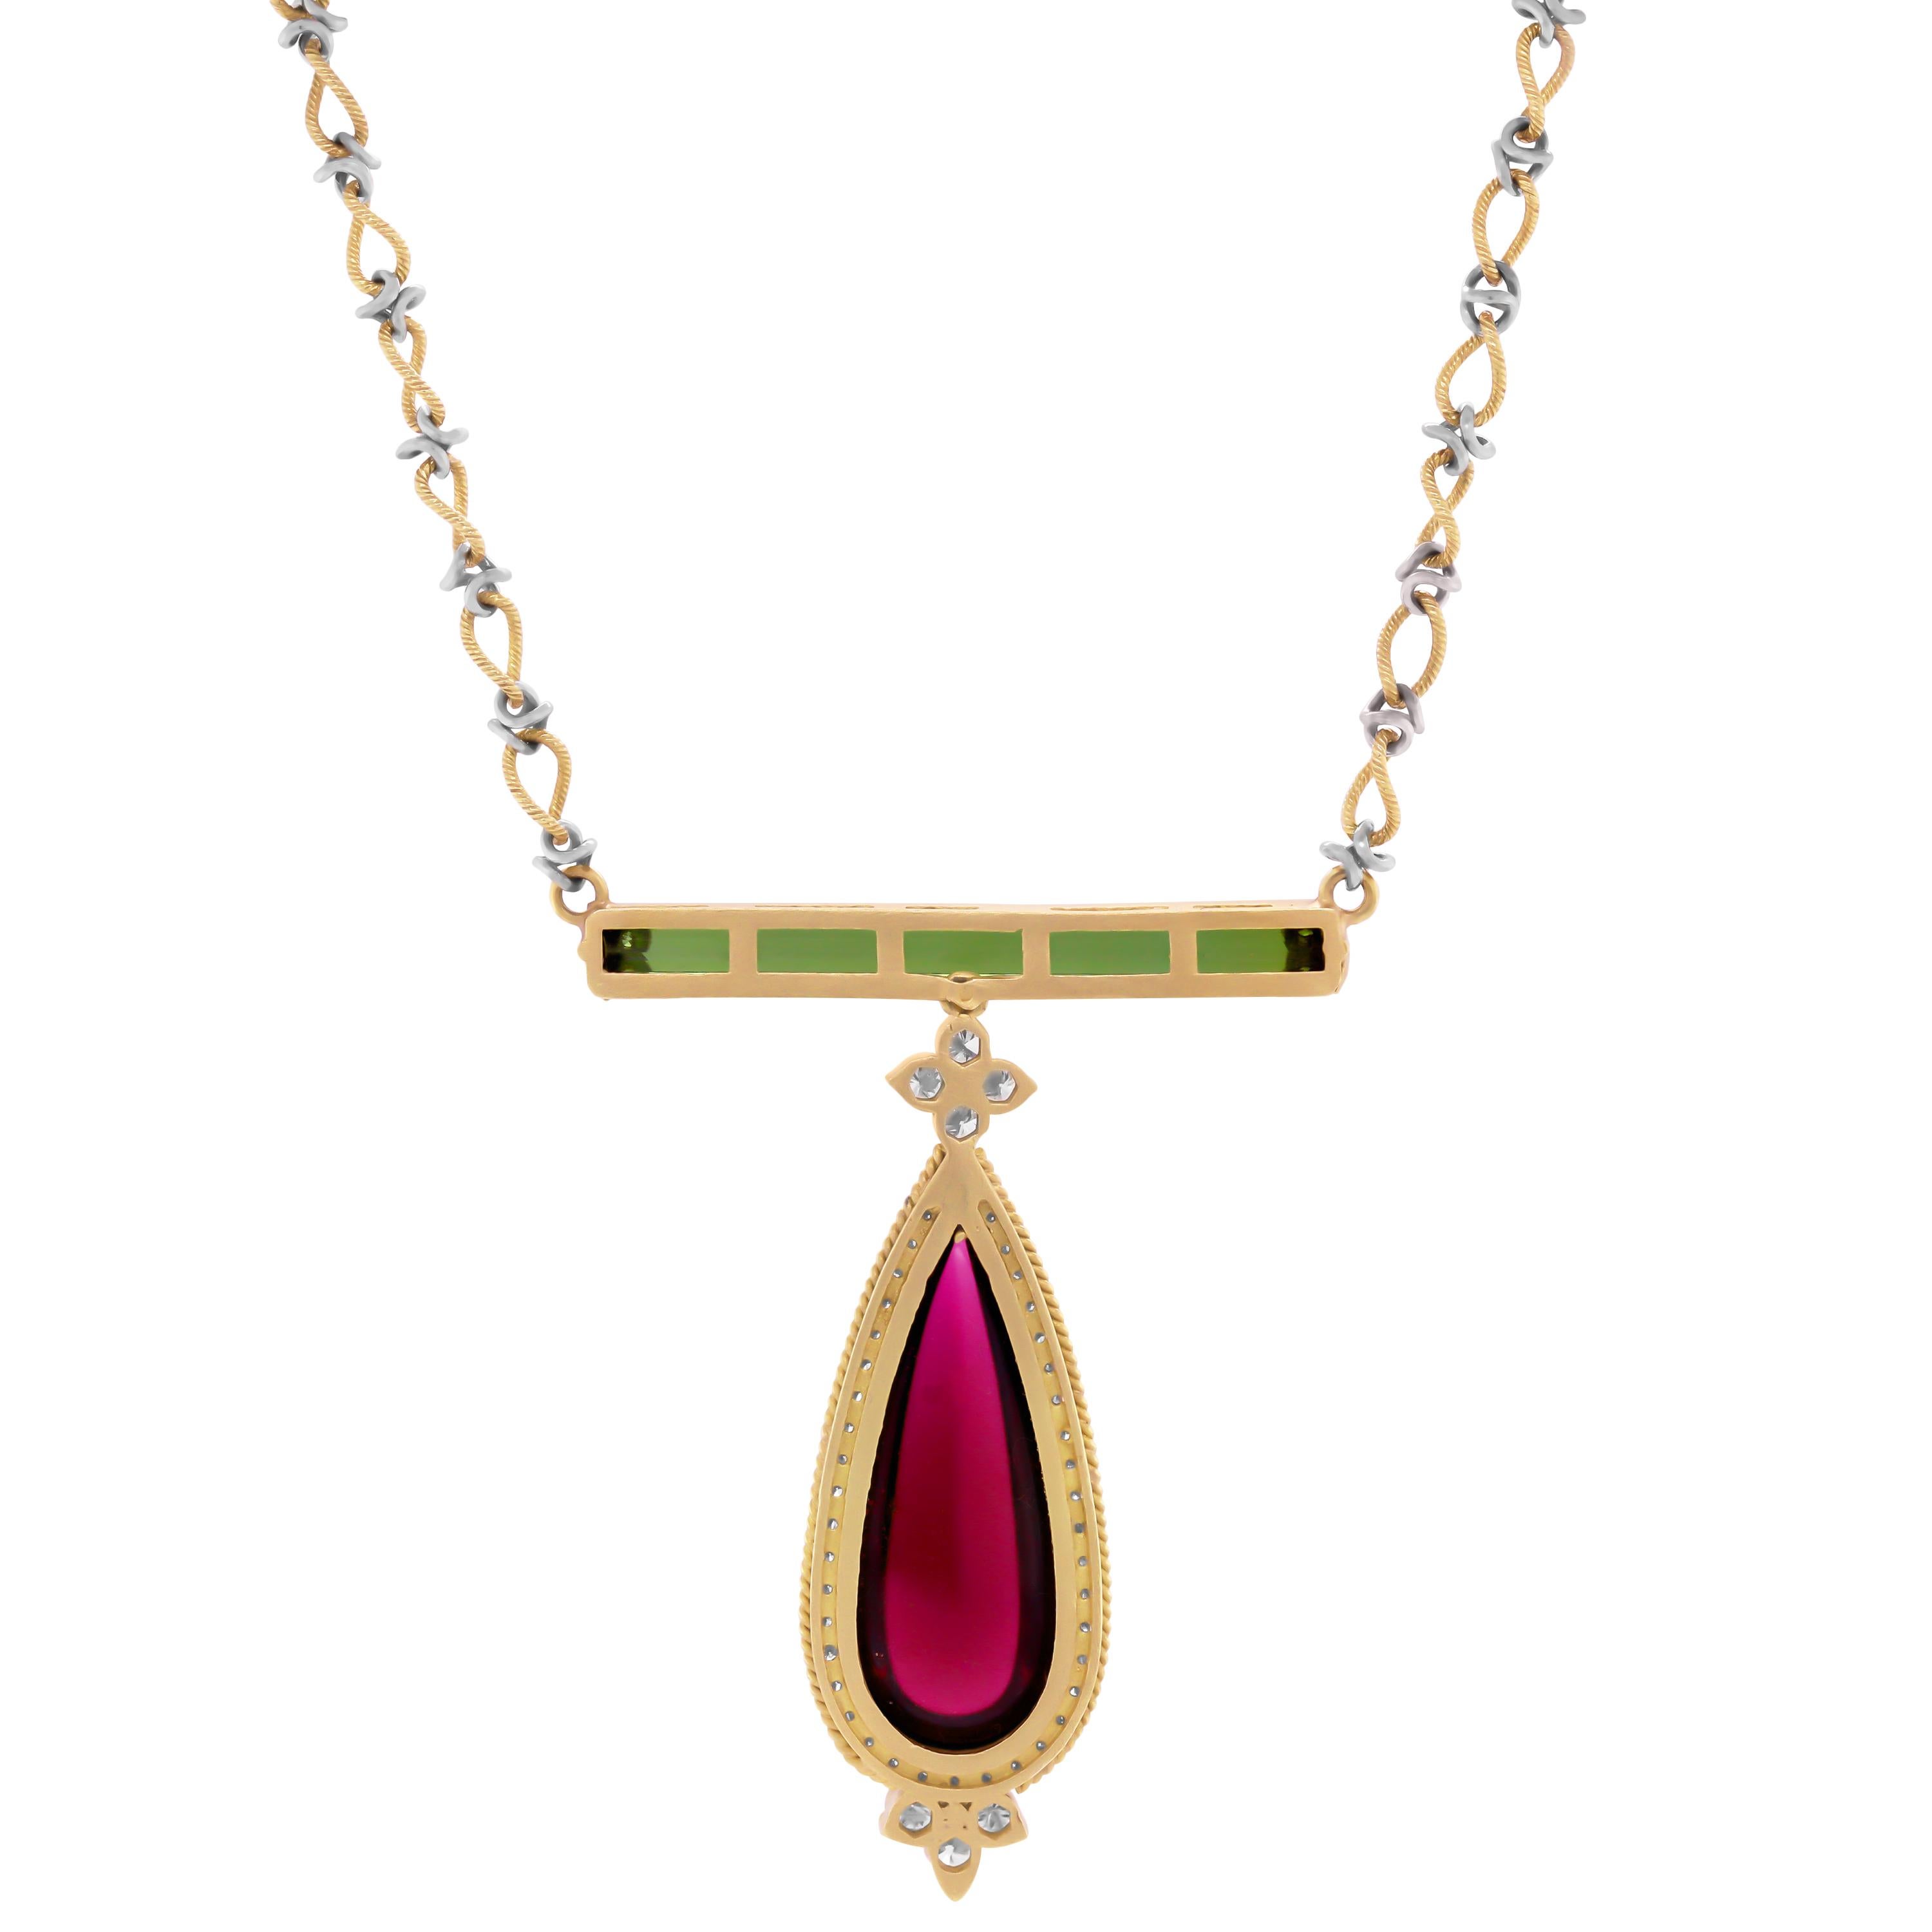 18K Yellow and White Gold Necklace with a Cabochon, Pearshape, Rubelite and Green Tourmaline Pendant by Stambolian

3.59 carat Rectangular Green Tourmaline
13.40 carat Cabochon, Pearshape Rubelite

1.05 carat G color, VS clarity diamonds

Pendant is